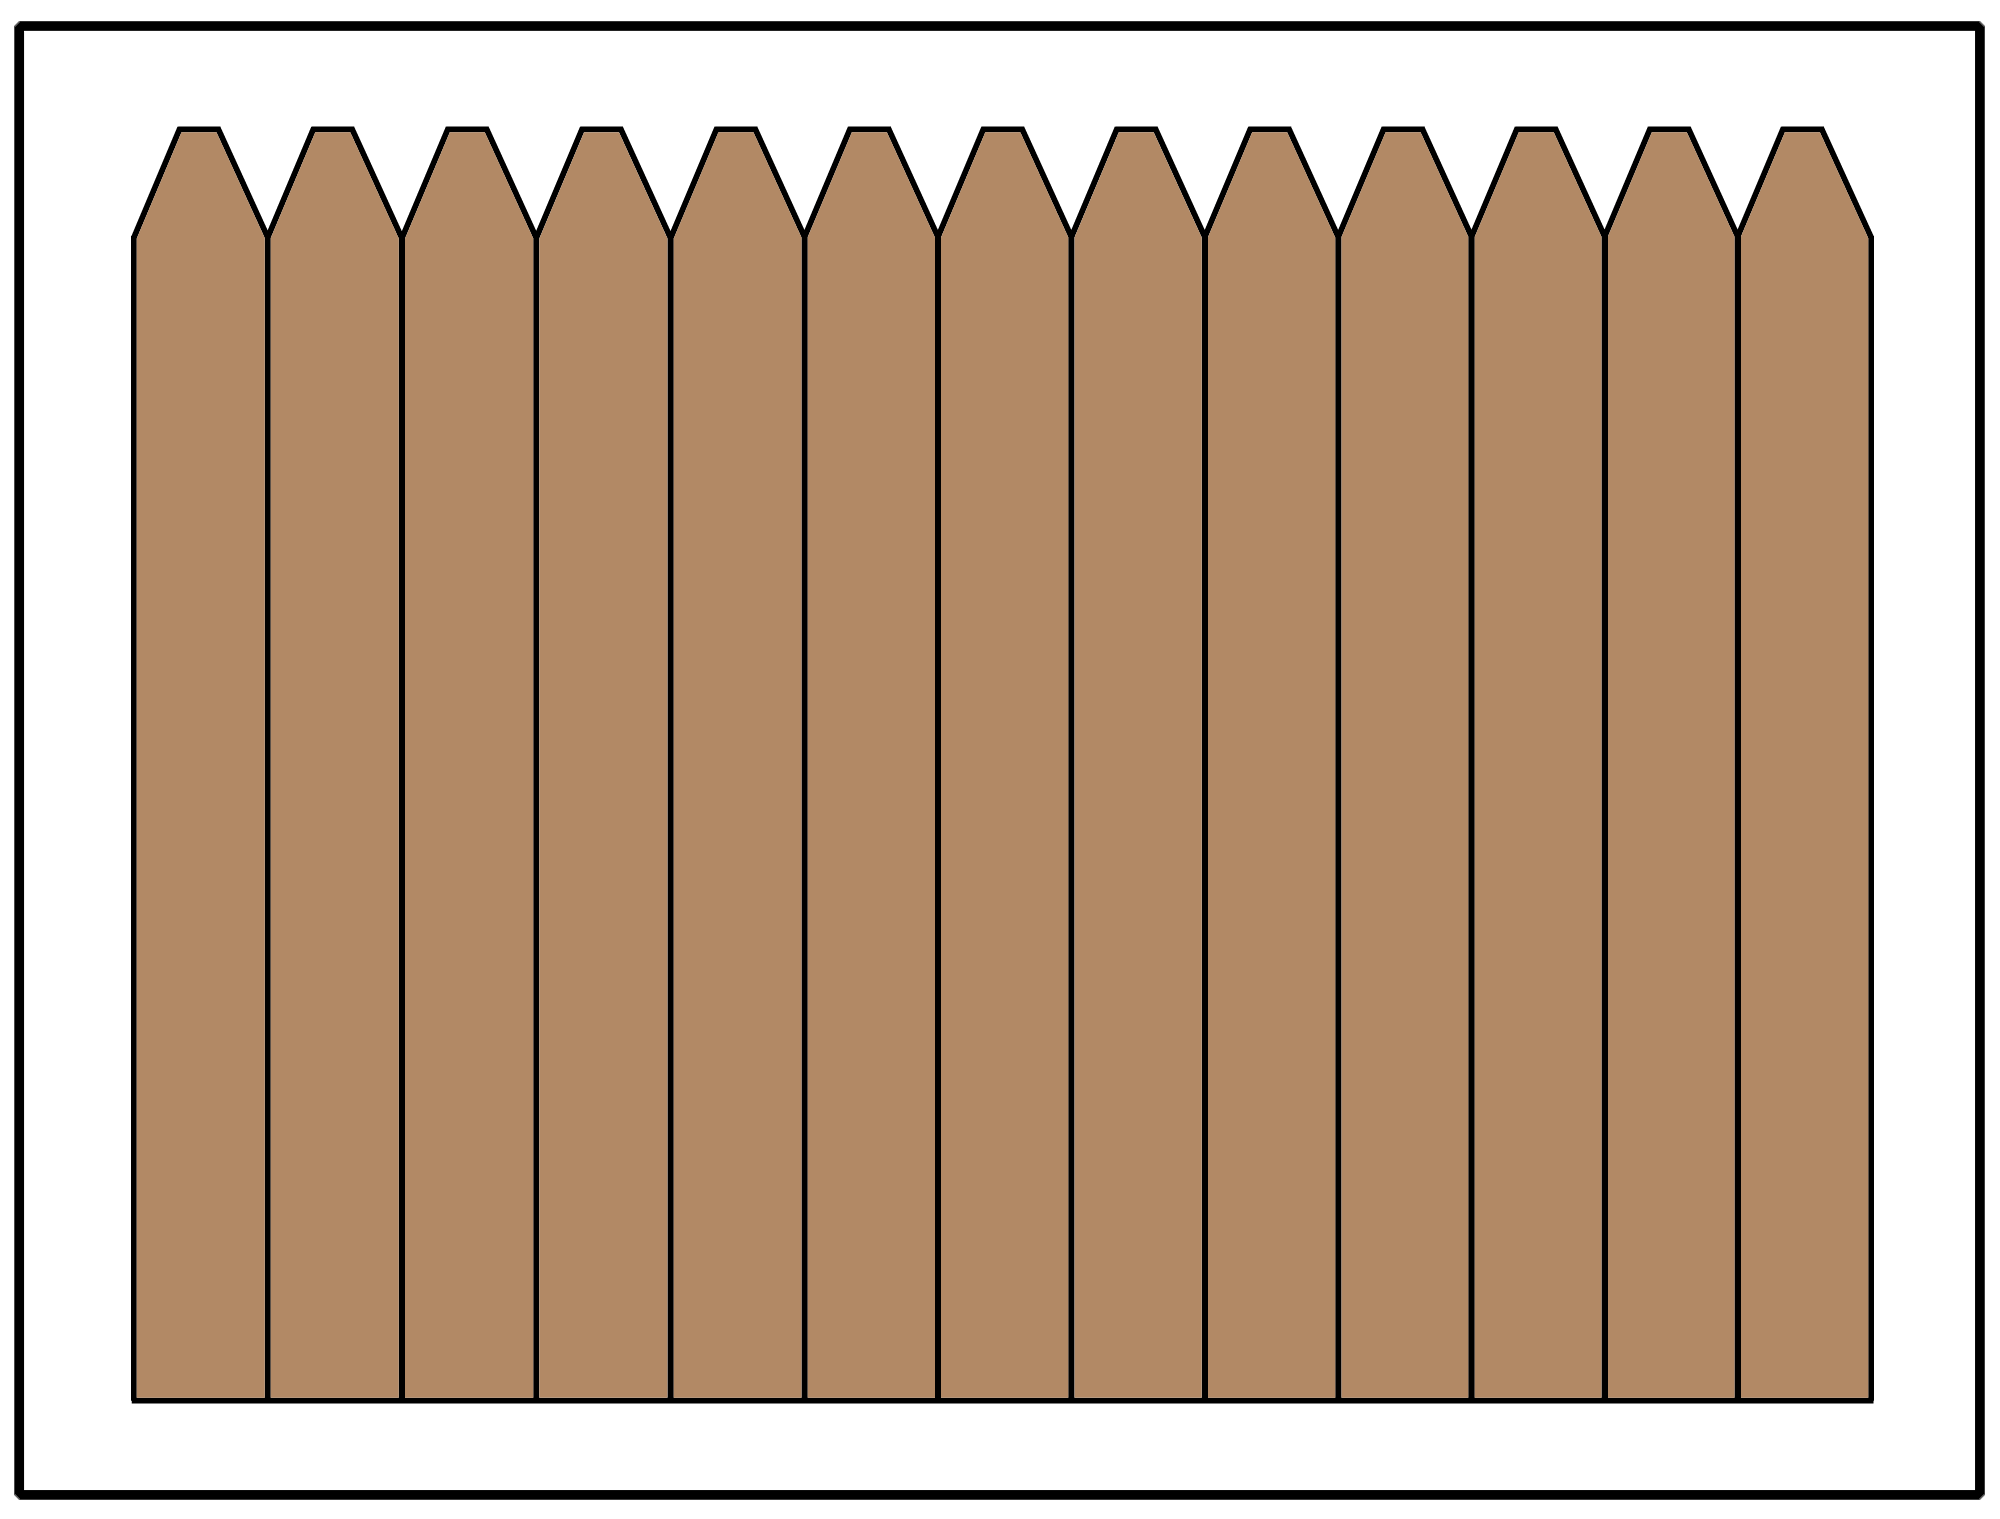 Illustration of a privacy fence using an angled picket